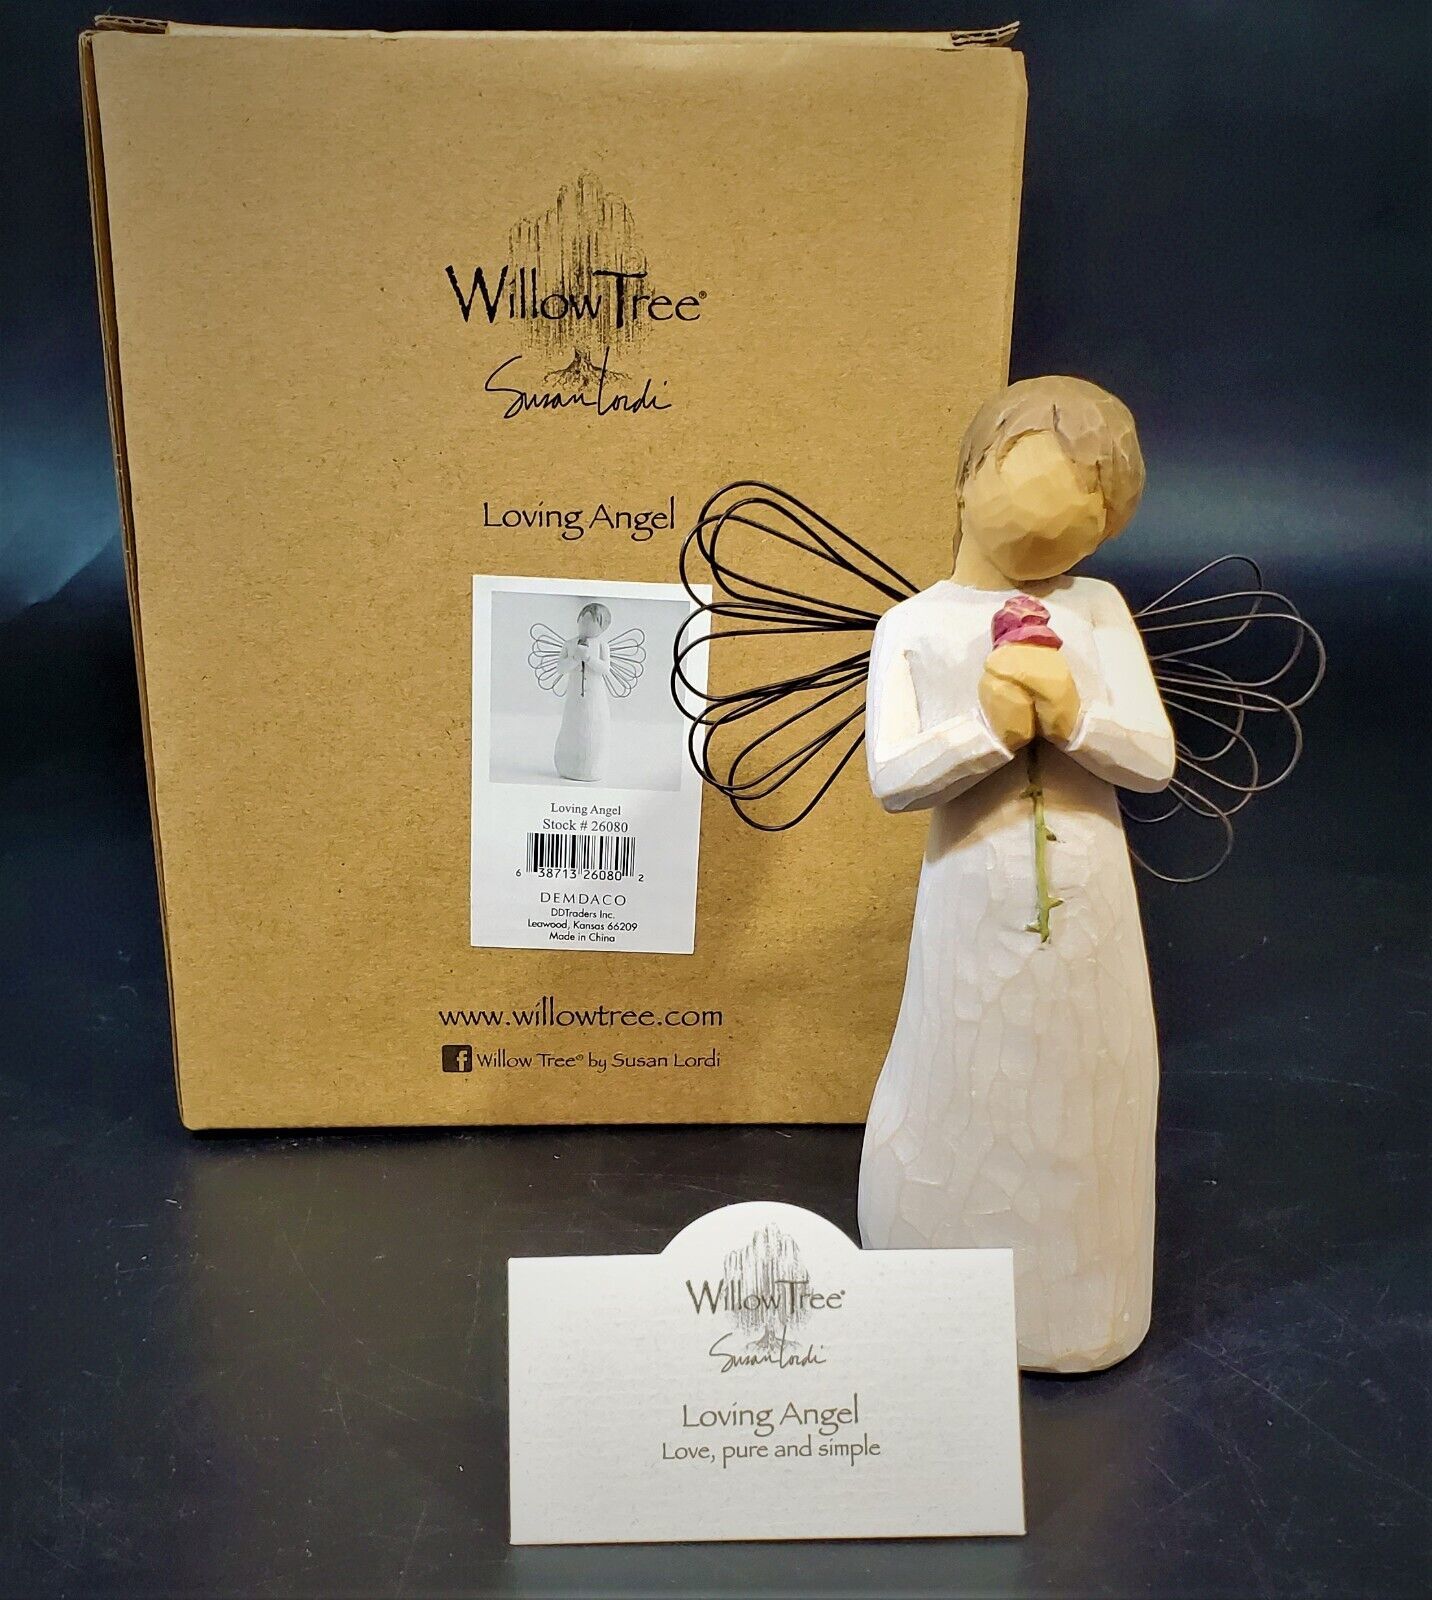 Demdaco Willow Tree "Loving Angel" - love, pure and simple. New in Box - $24.74